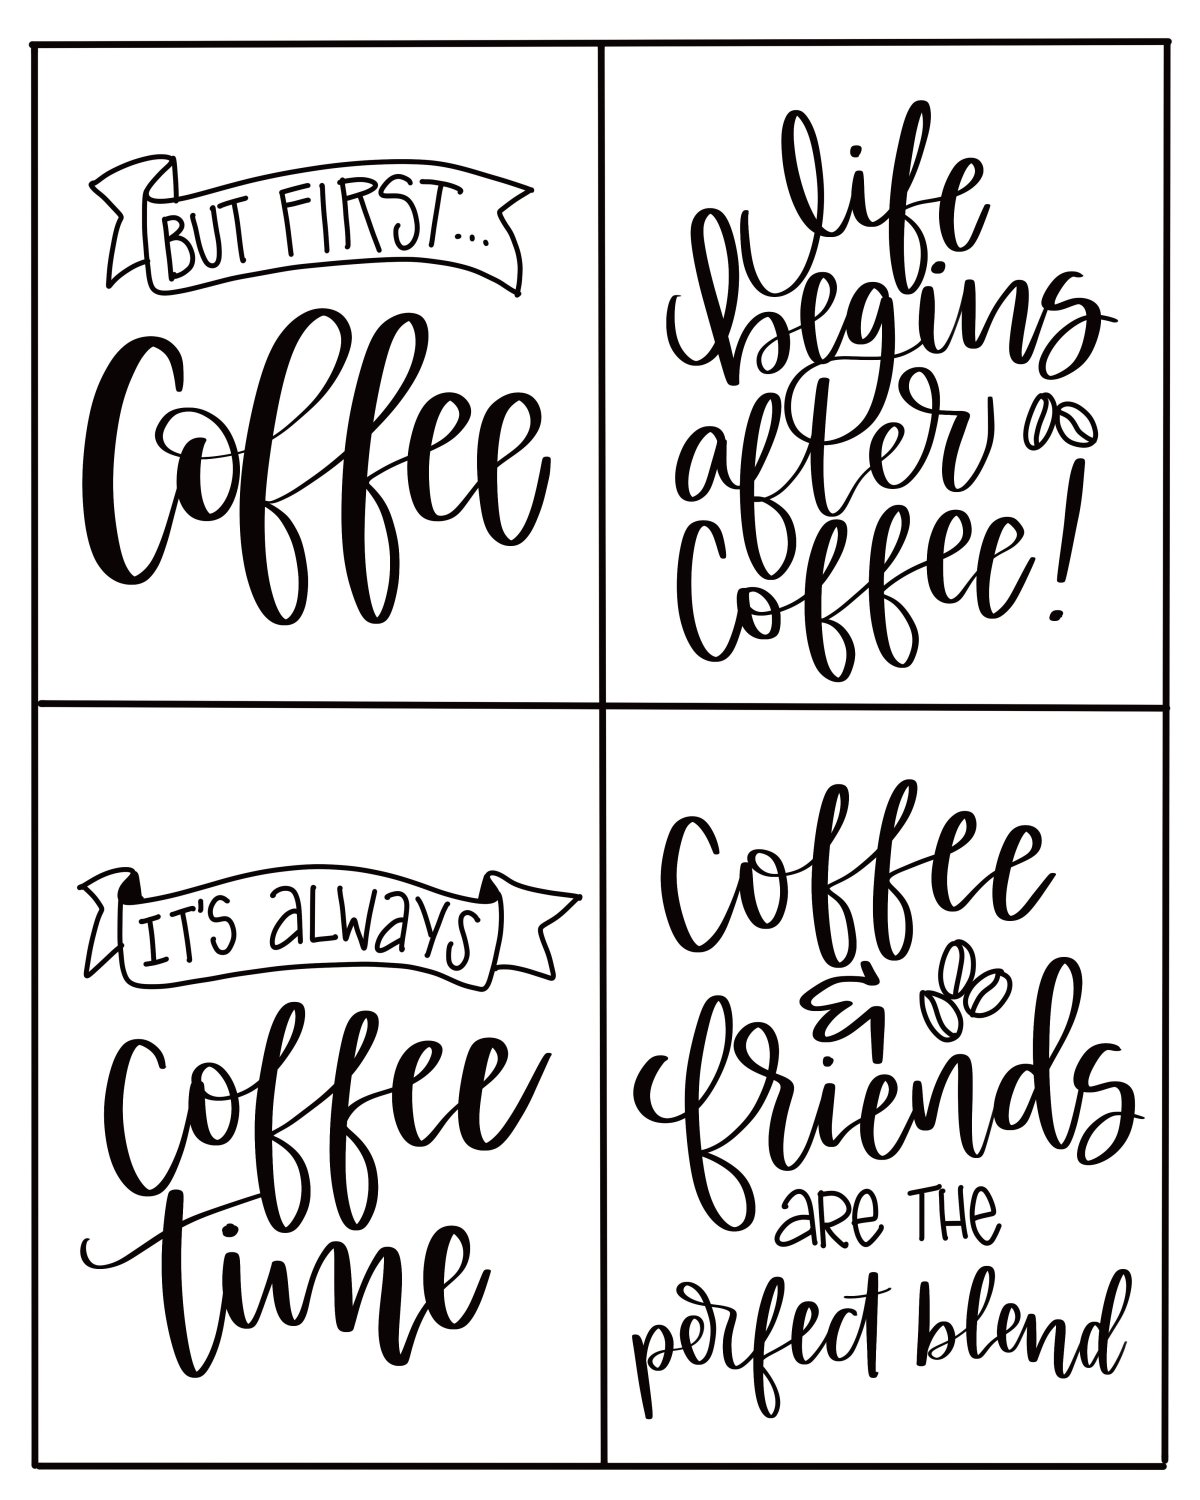 Image is the free printable coffee tags.